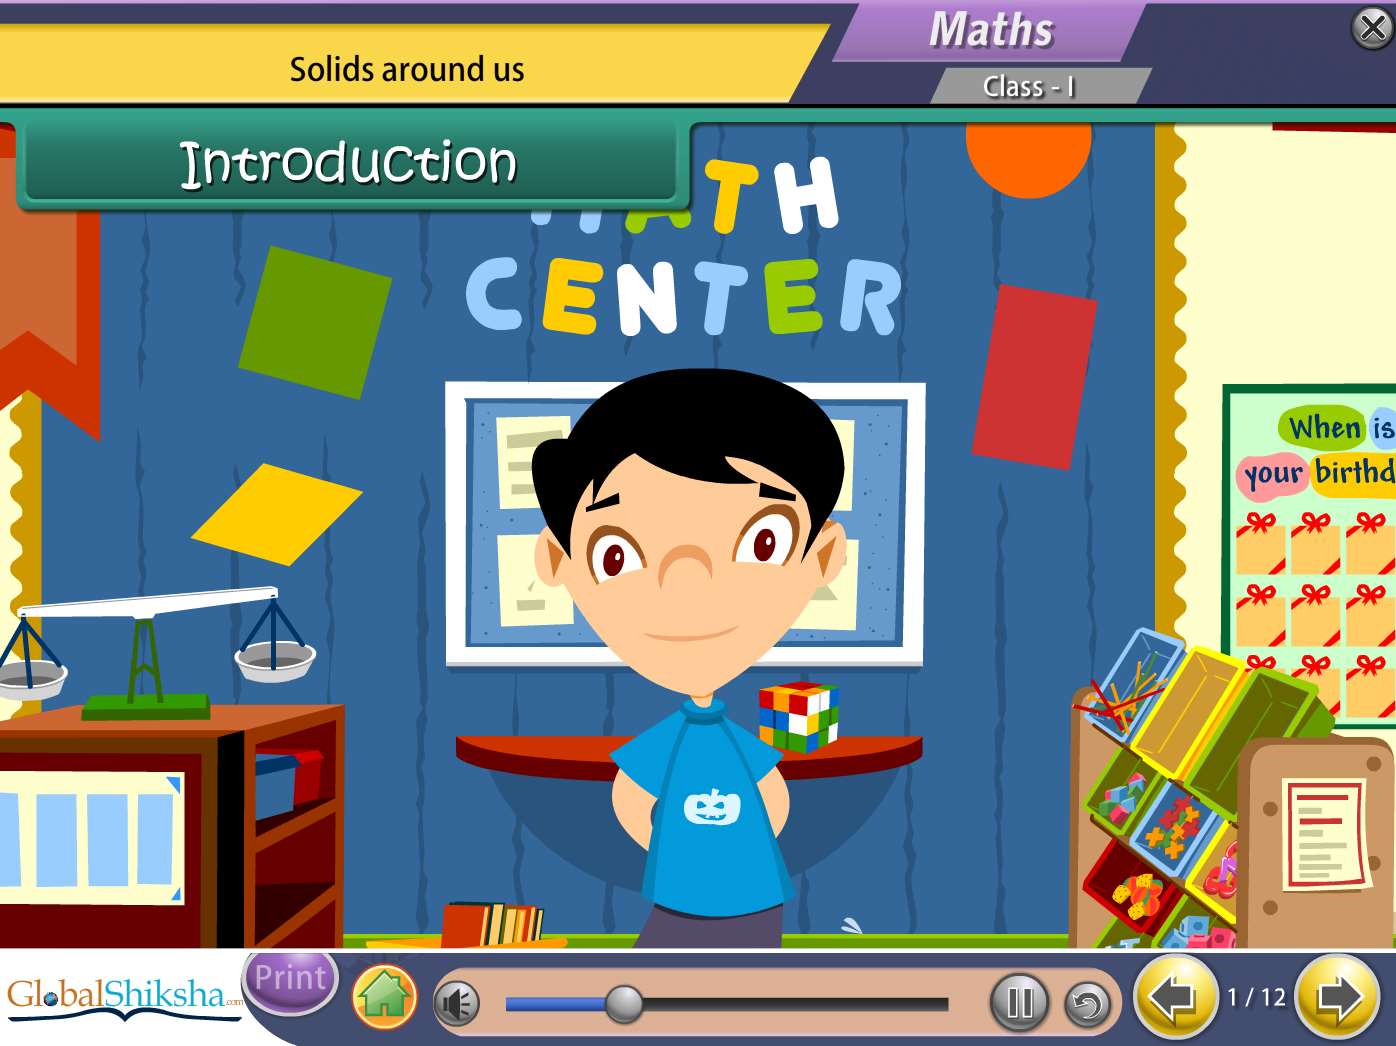 Maharashtra State Board Class 1 Maths & Science Animated Pendrive in English